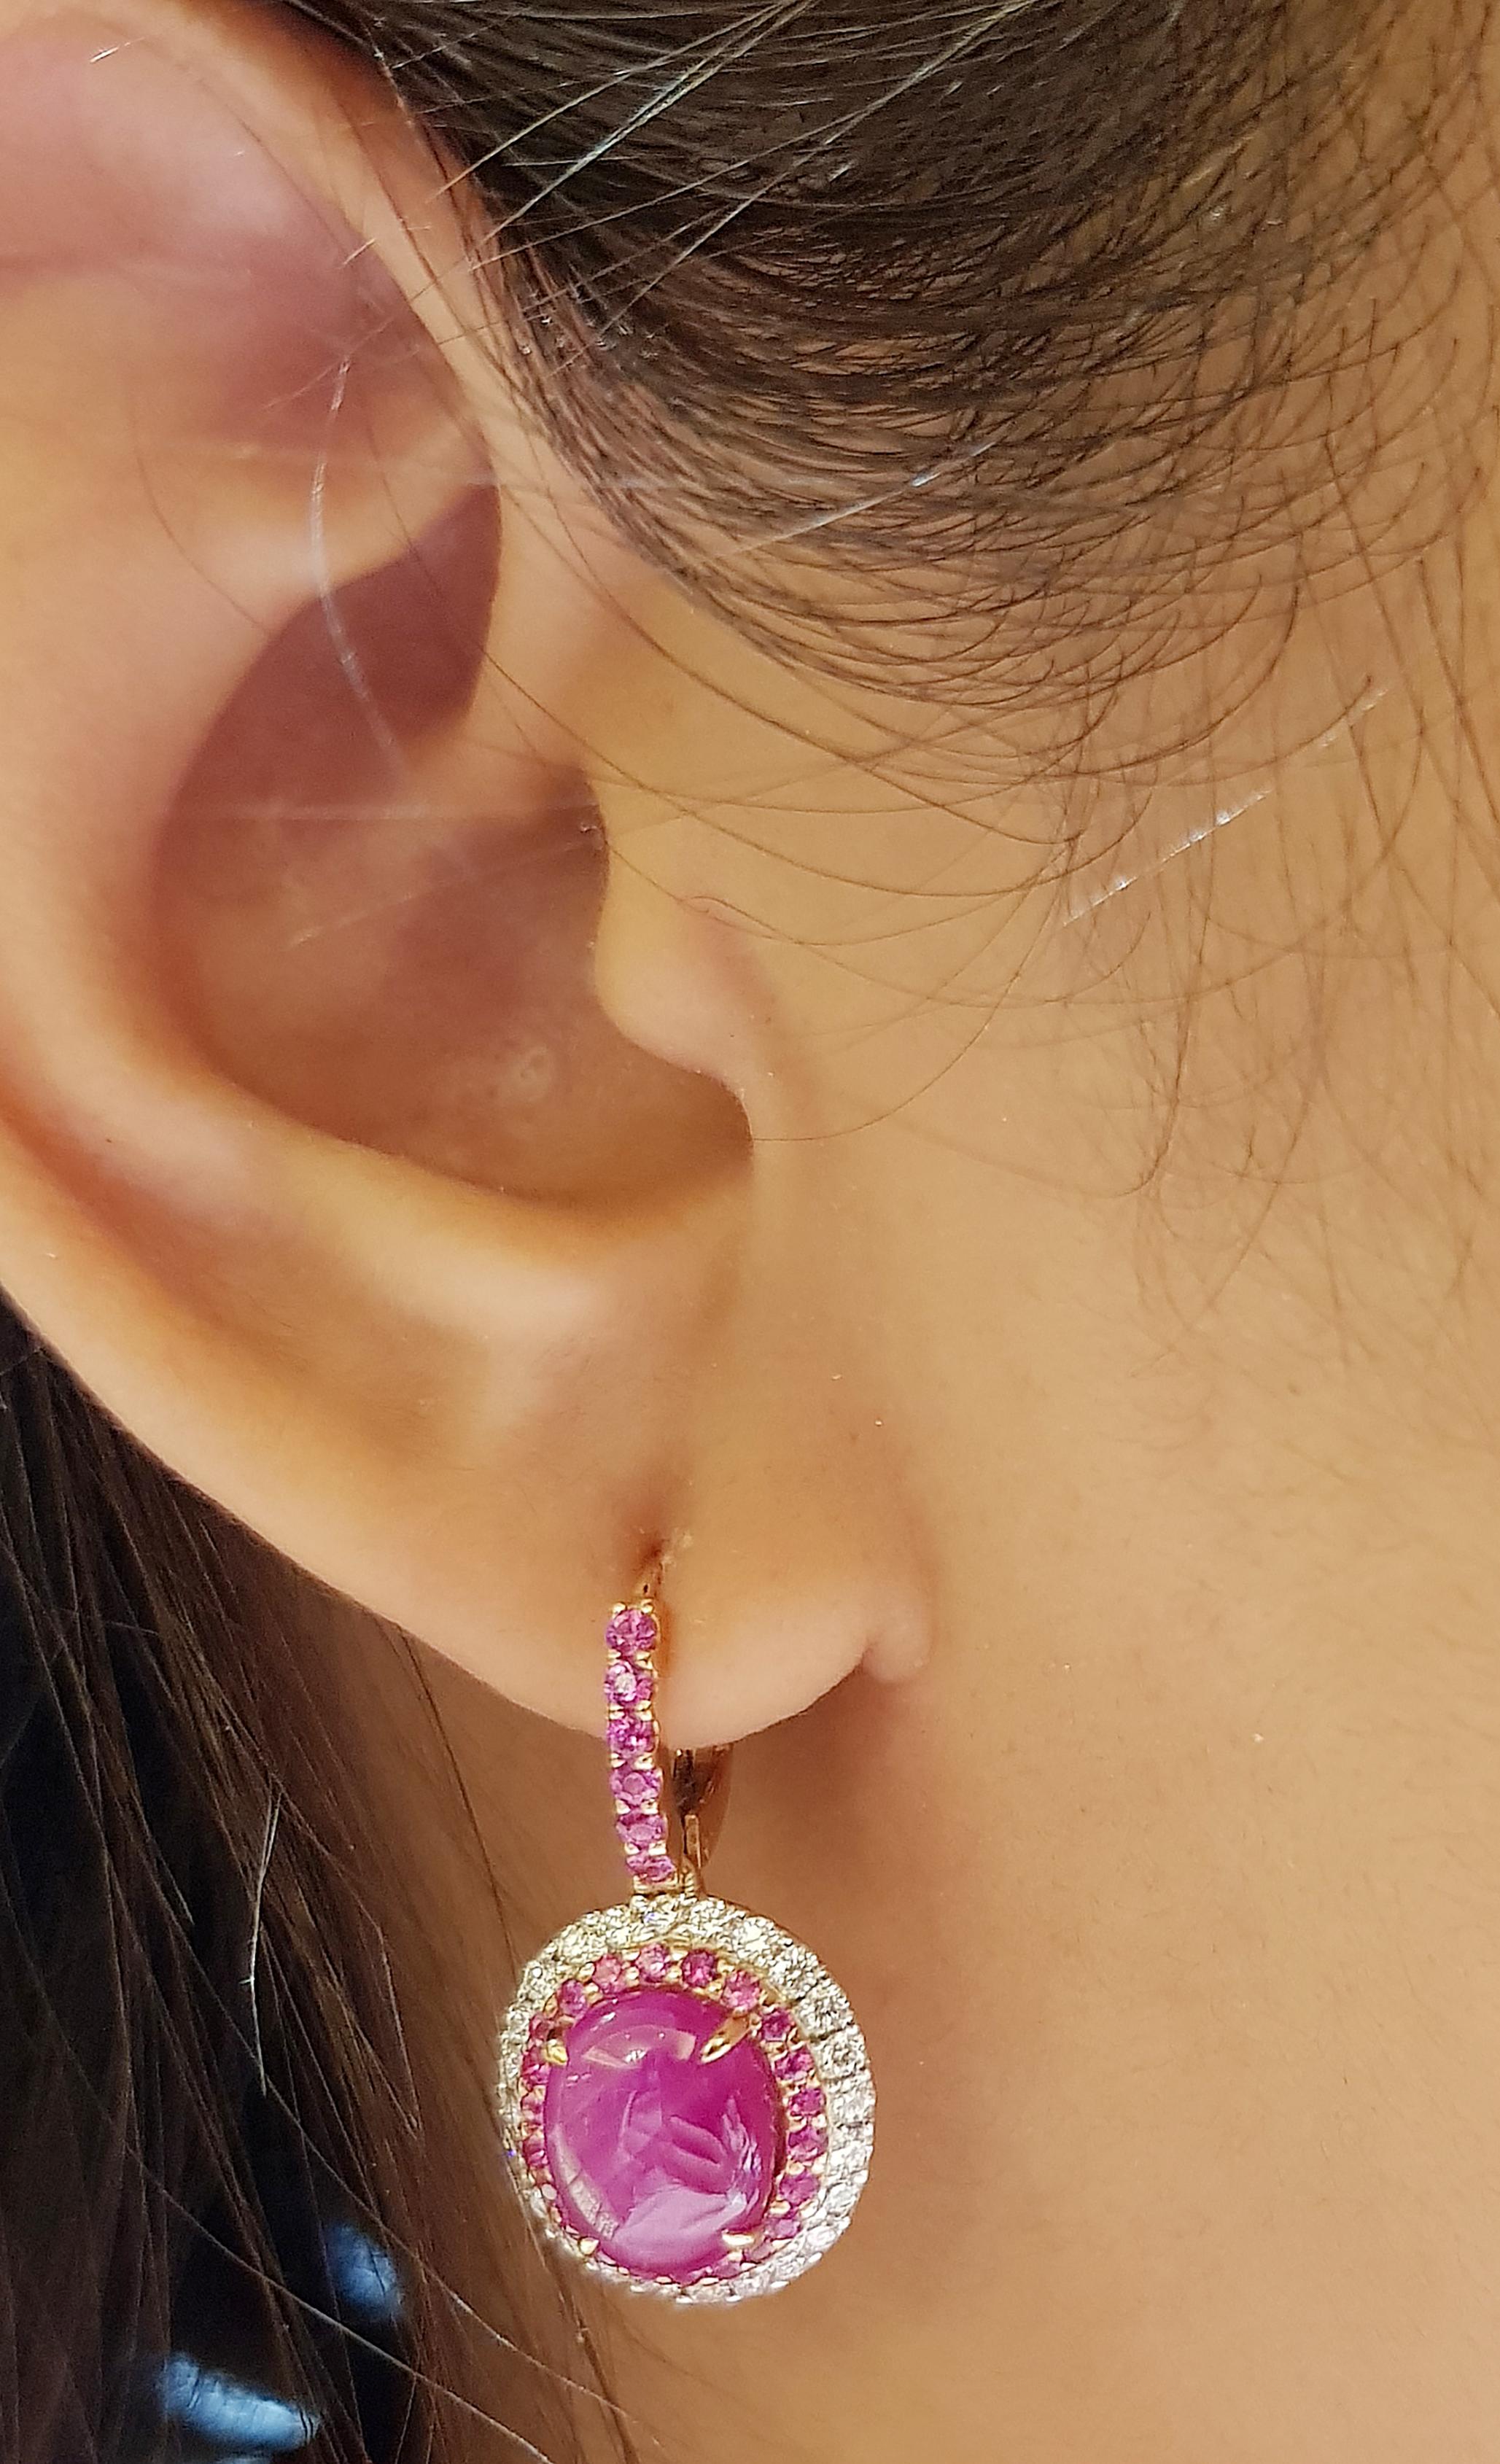 Star Ruby 8.01 carats with Pink Sapphire 0.80 carat and Diamond 0.70 carat Earrings set in 18 Karat Rose Gold Settings

Width:  1.3 cm 
Length: 2.5 cm
Total Weight: 8.46 grams

